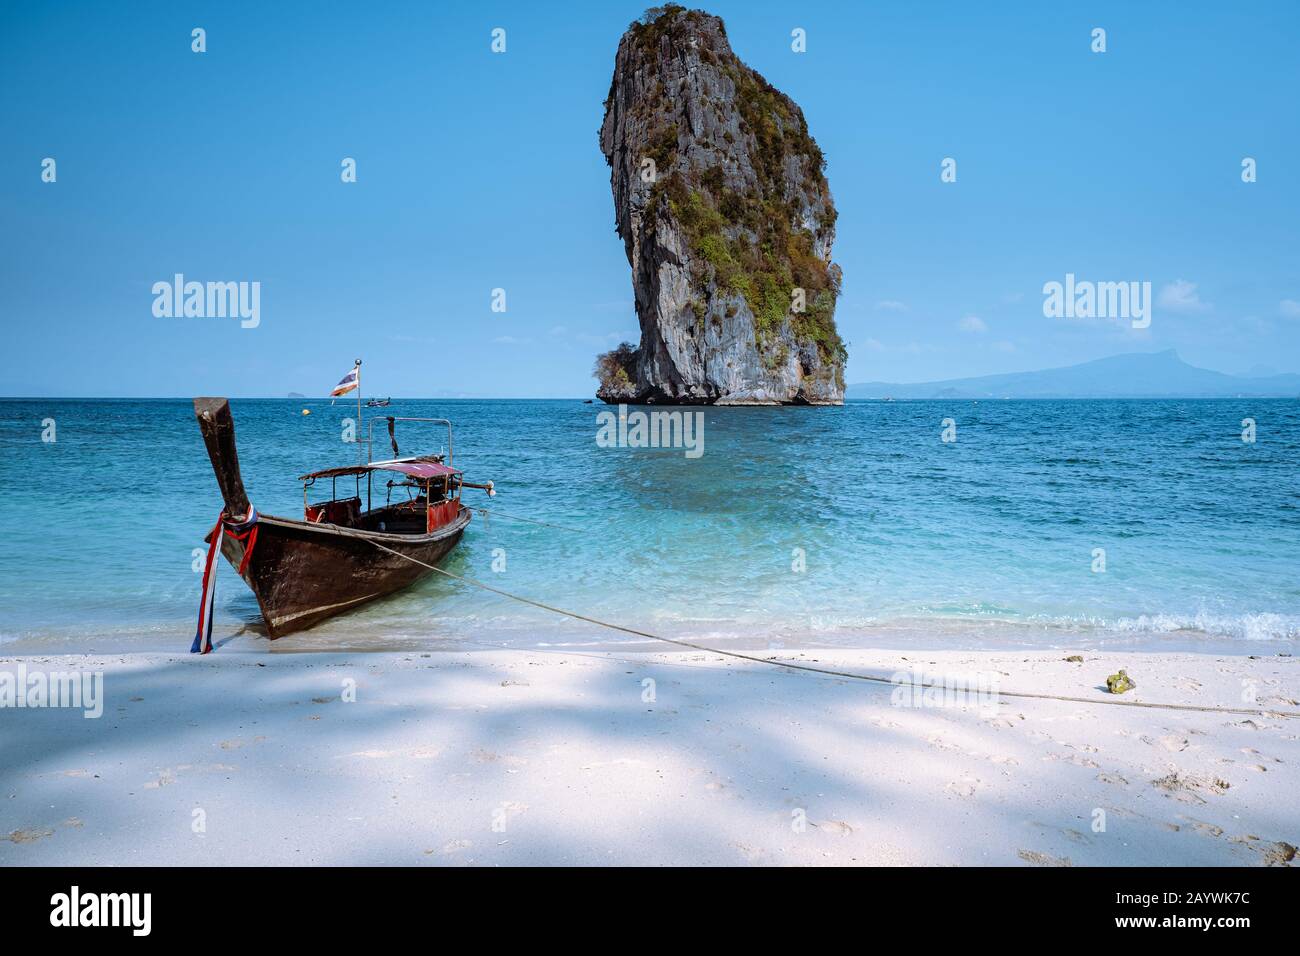 Koh Poda Thailand, The beautiful landscape of Koh Poda or Poda Island in Krabi province of Thailand. This island has white sand beach and surrounded Stock Photo